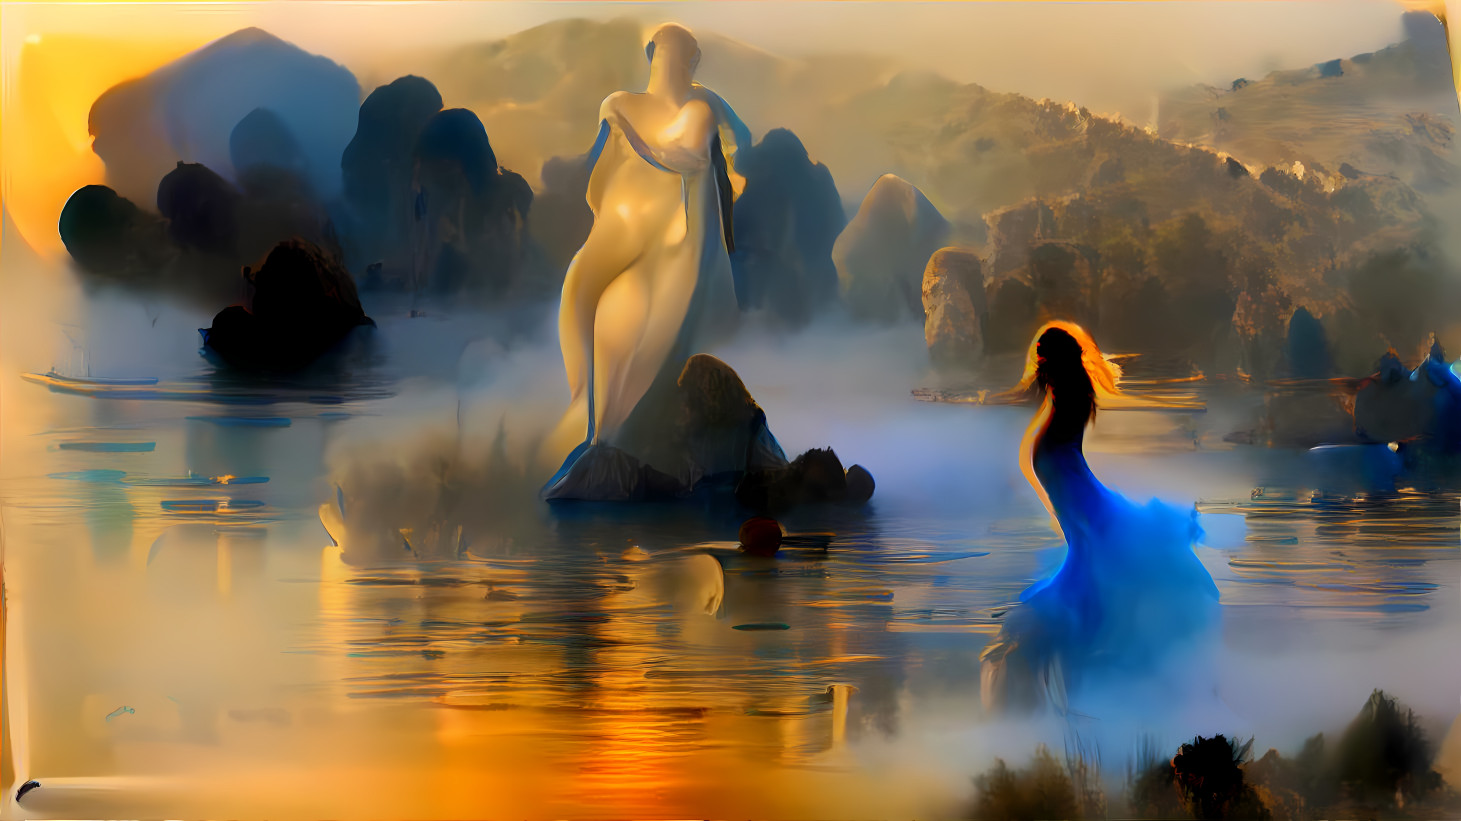 Lady in the Misty Blue Lake